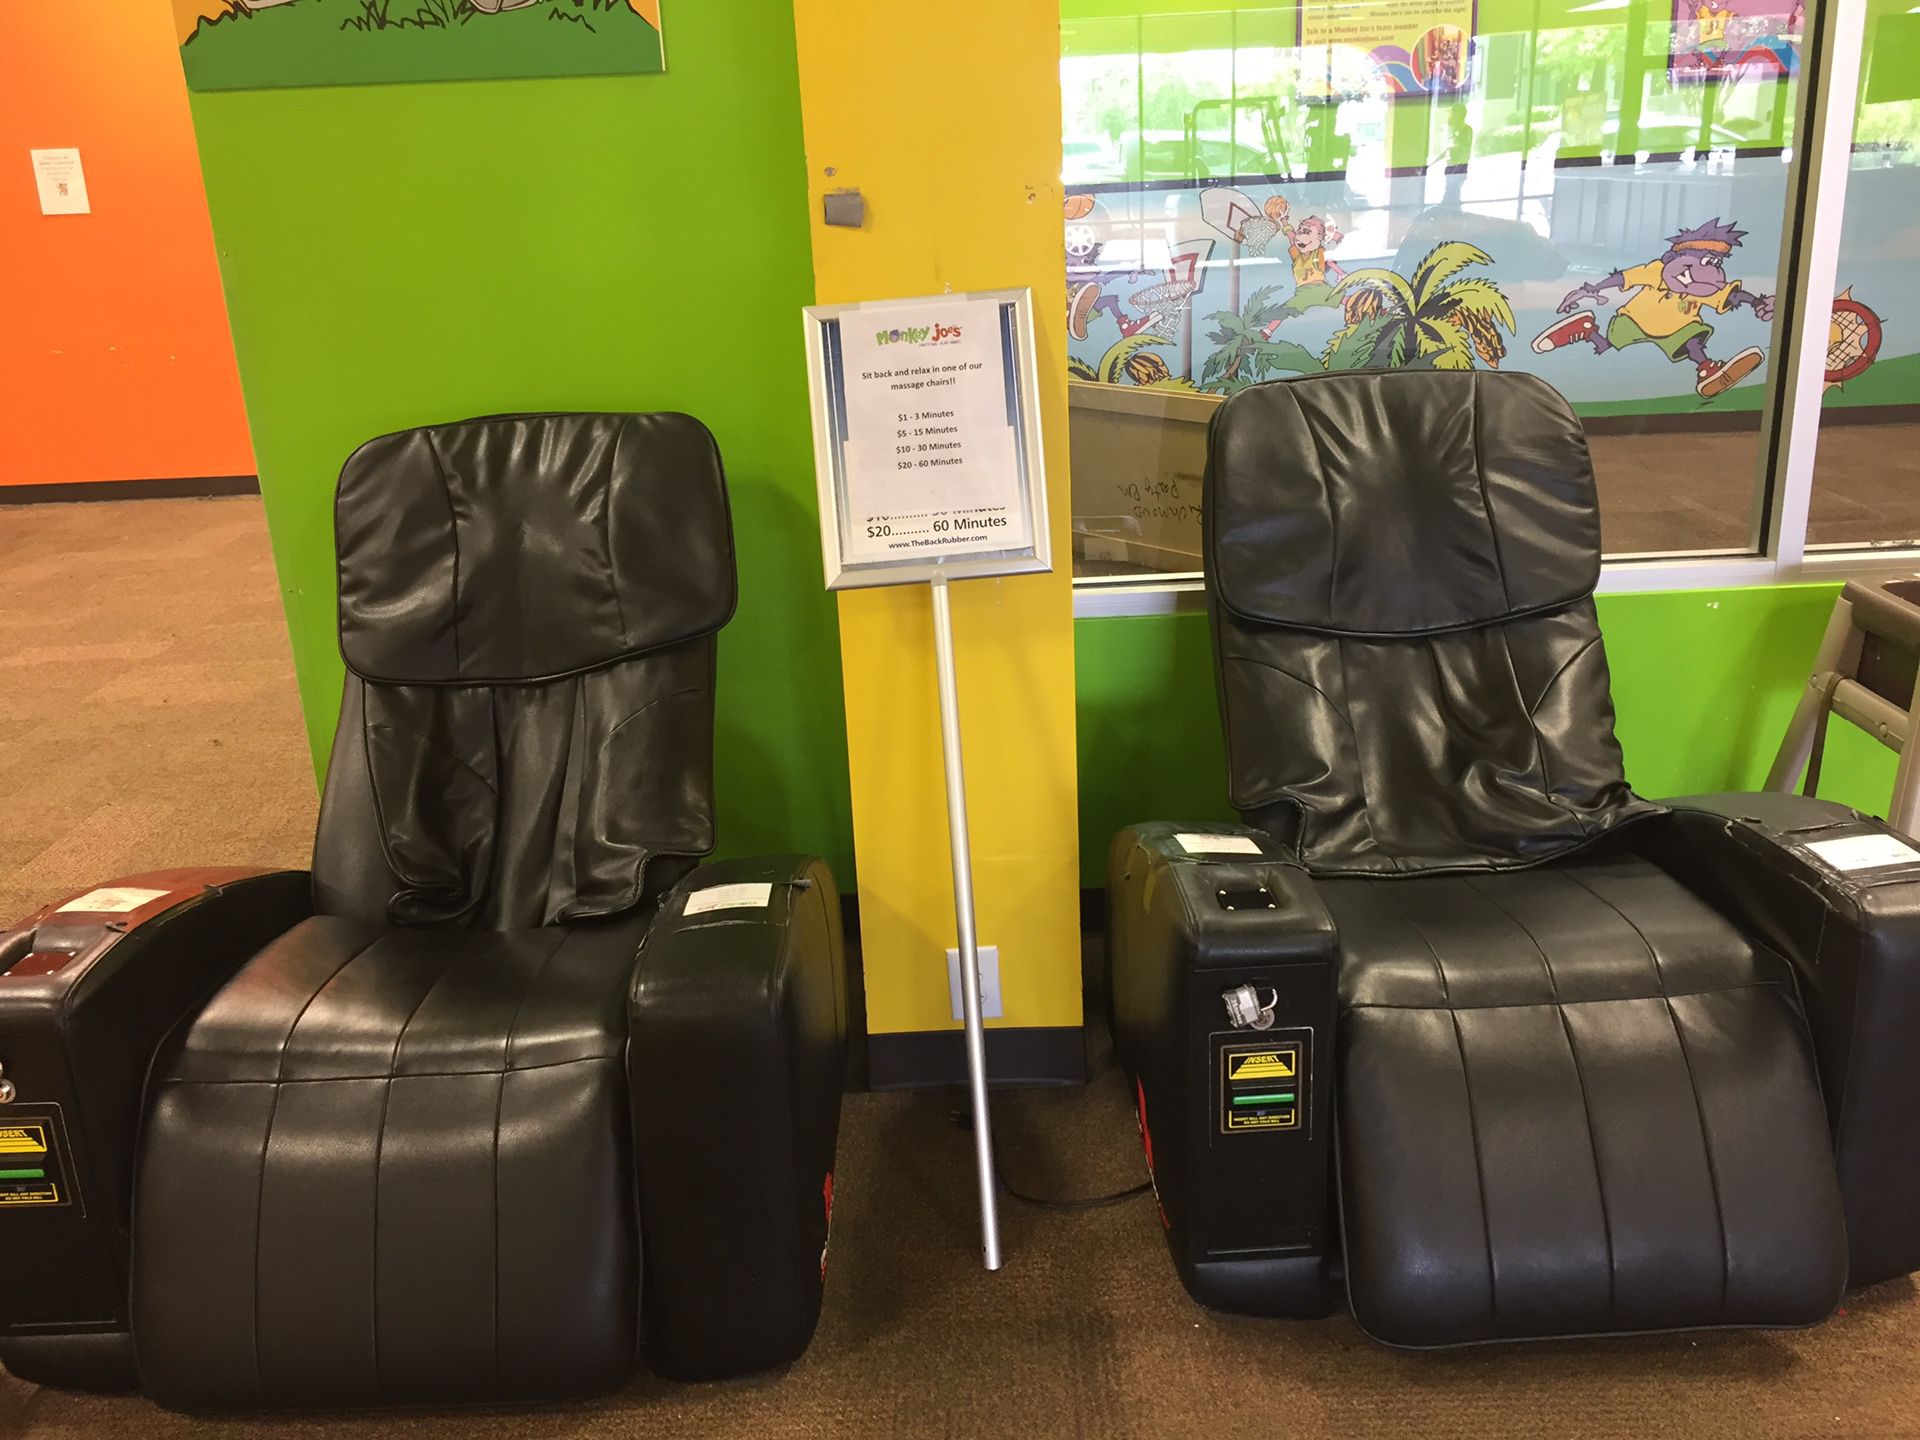 Two Vending Massage Chairs